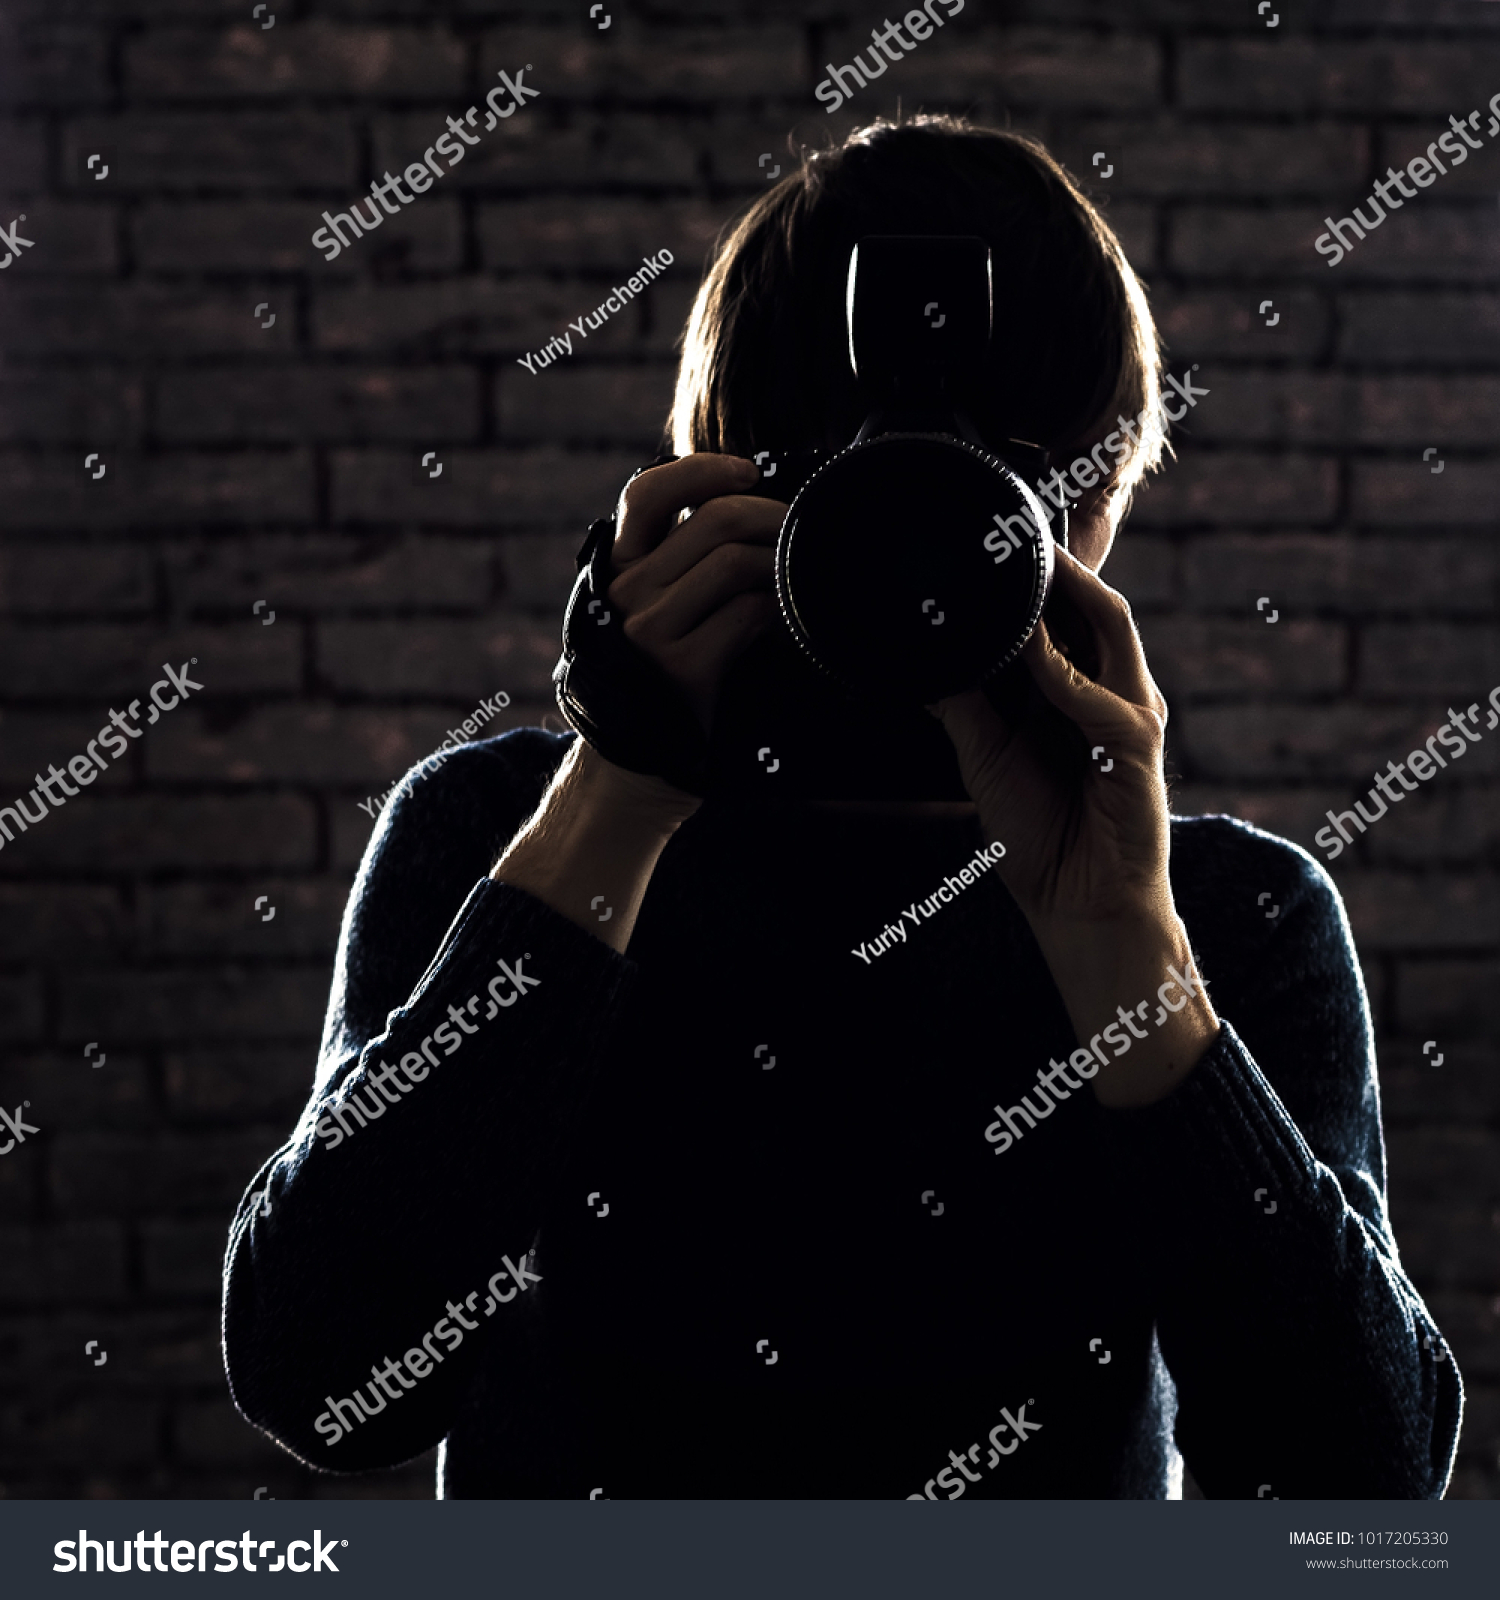 Silhouette of Photographer on brick wall background #1017205330